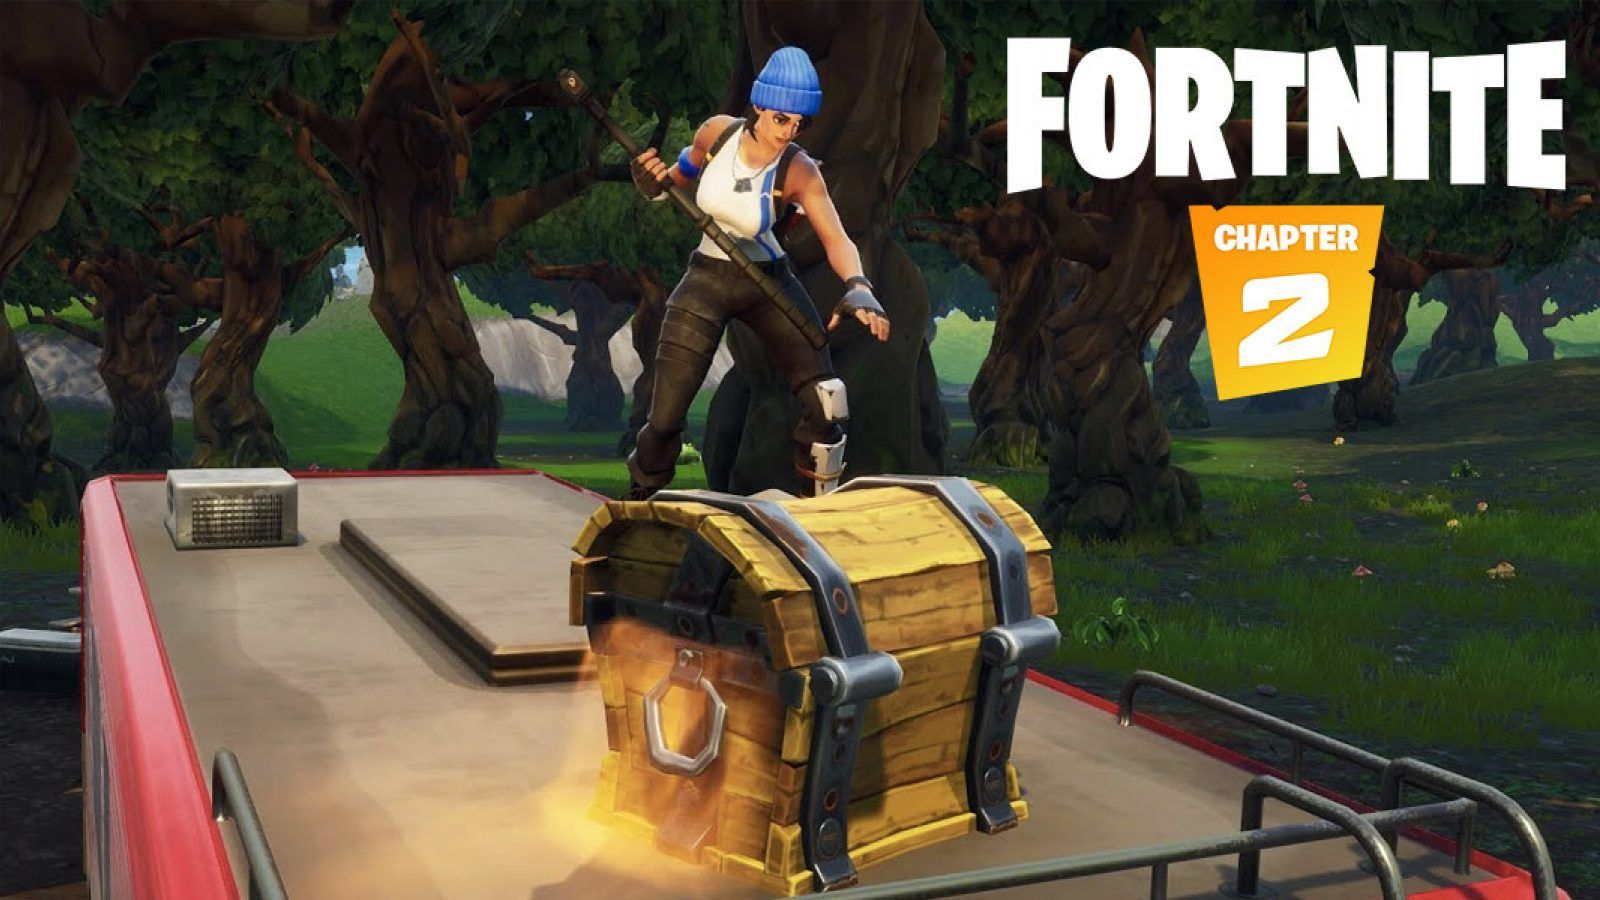 All Fortnite Chapter 2 chest locations revealed